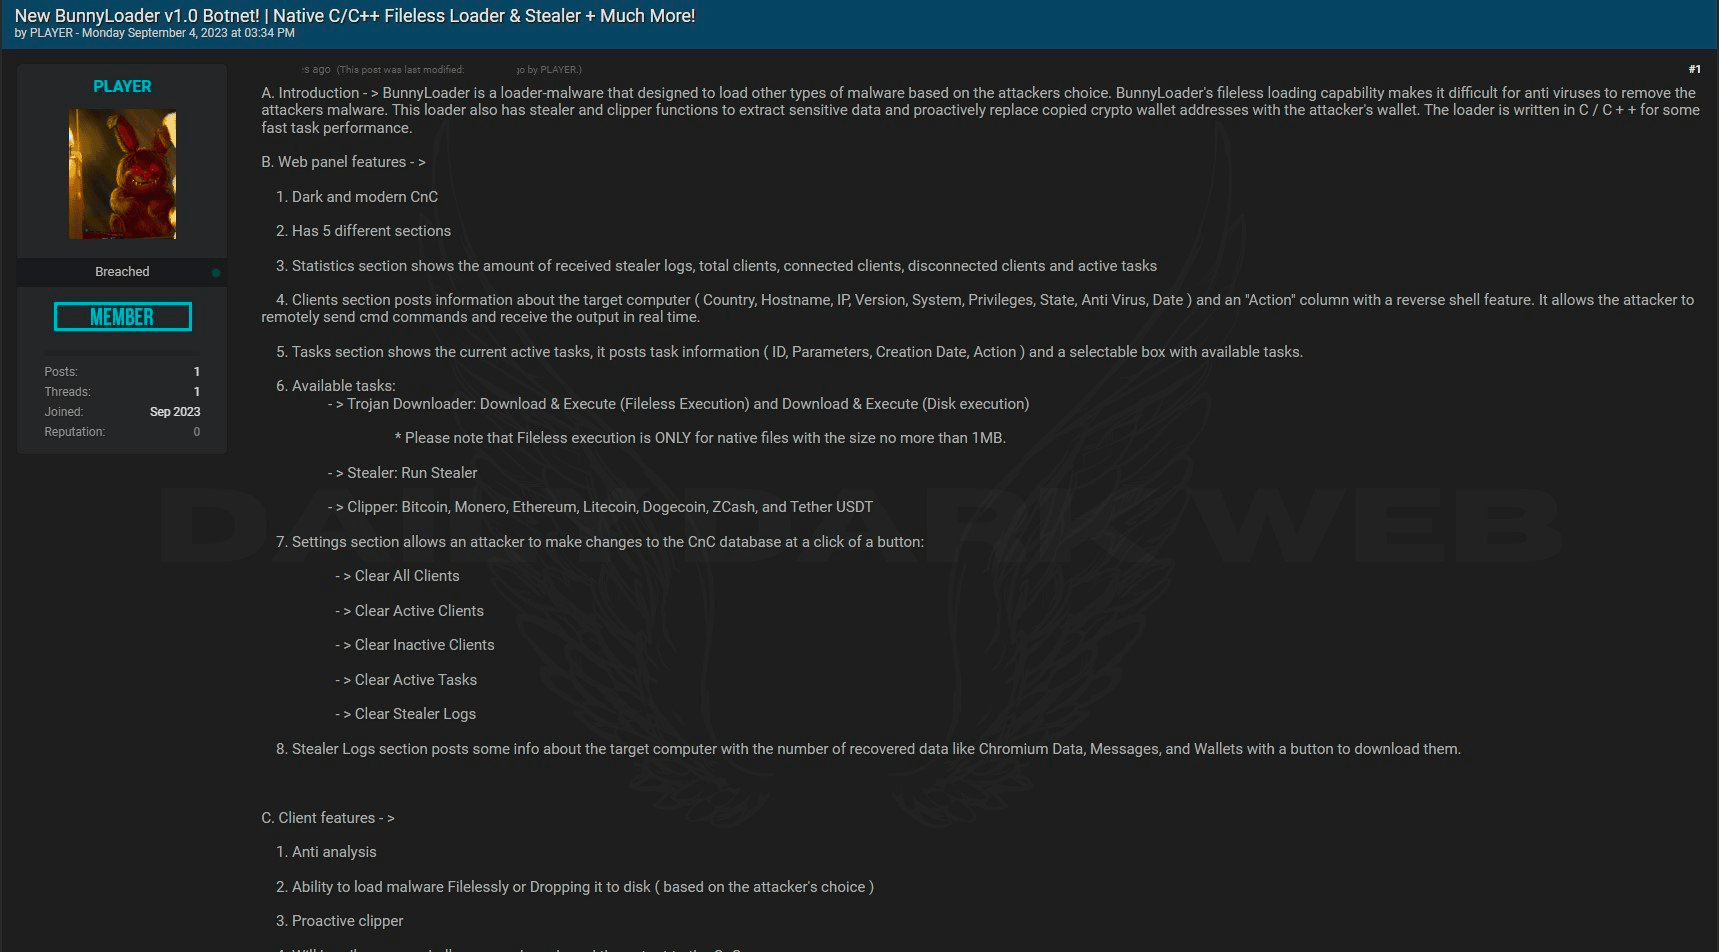 Bunny Loader 3.0 Released on BreachForums Steals Crypto Credentials